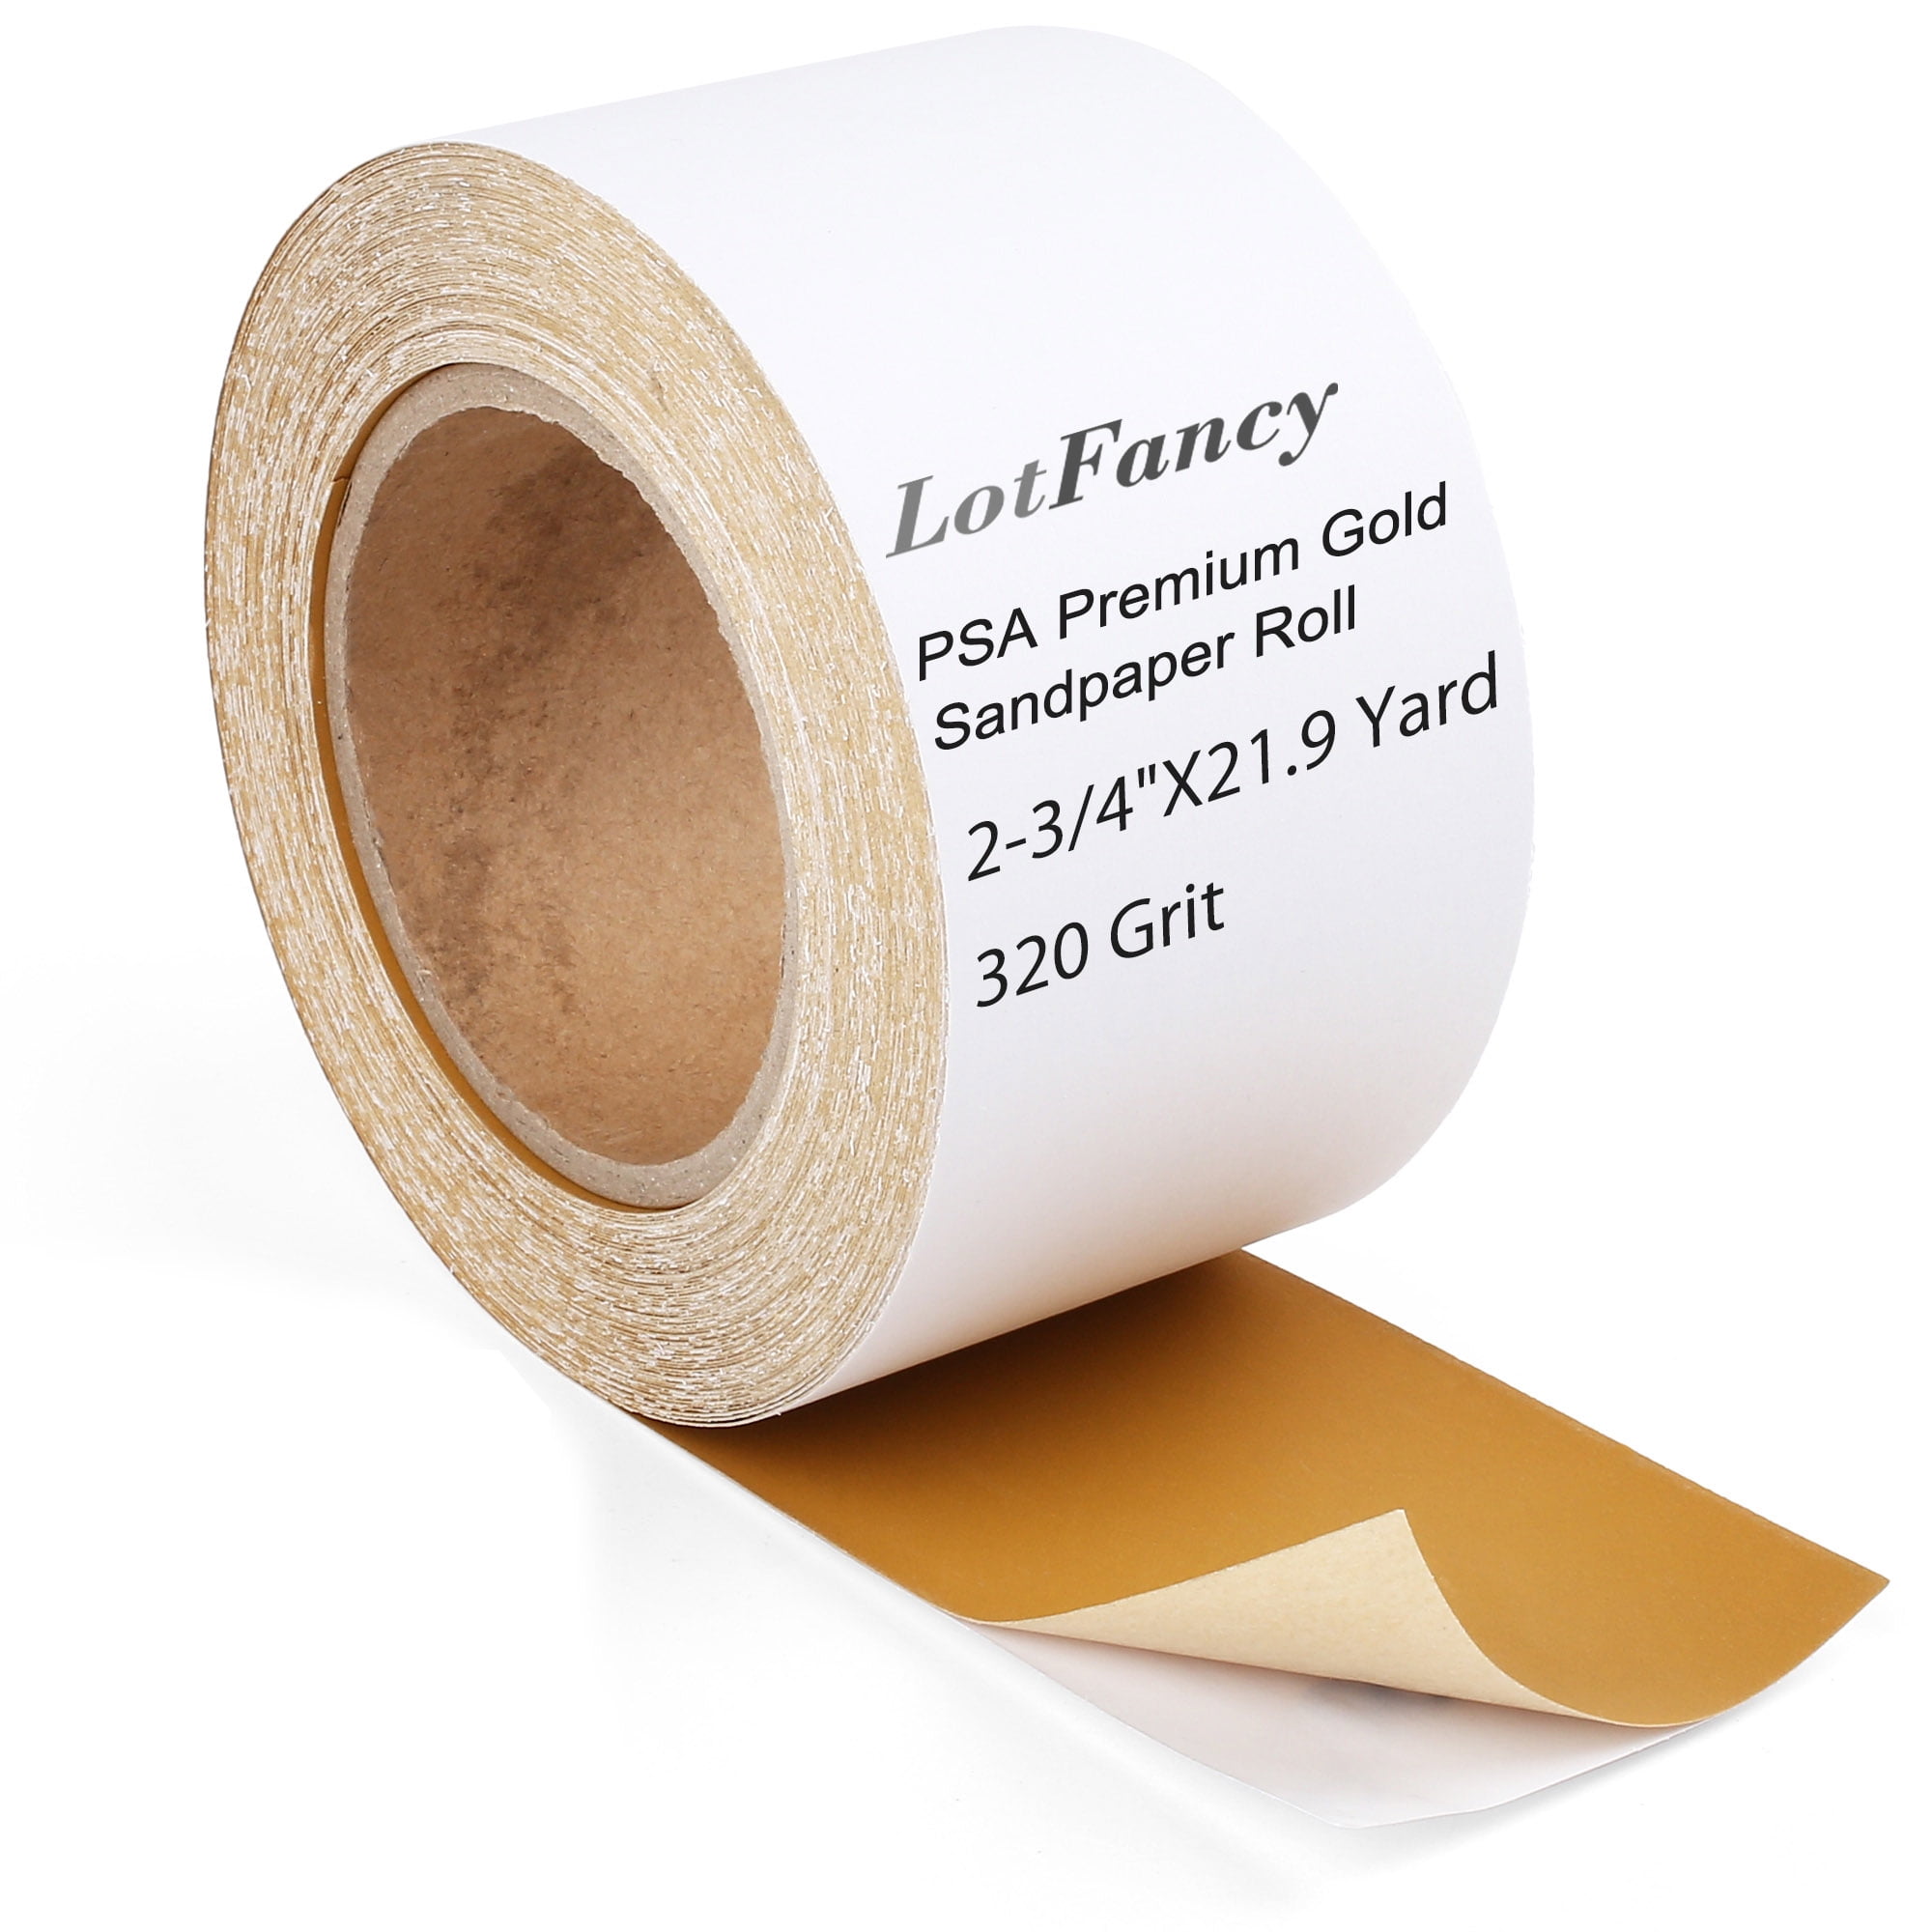 220 Grit Gold Longboard 20 Yards Long by 2-3/4" Wide PSA Self Adhesive Sandpaper 